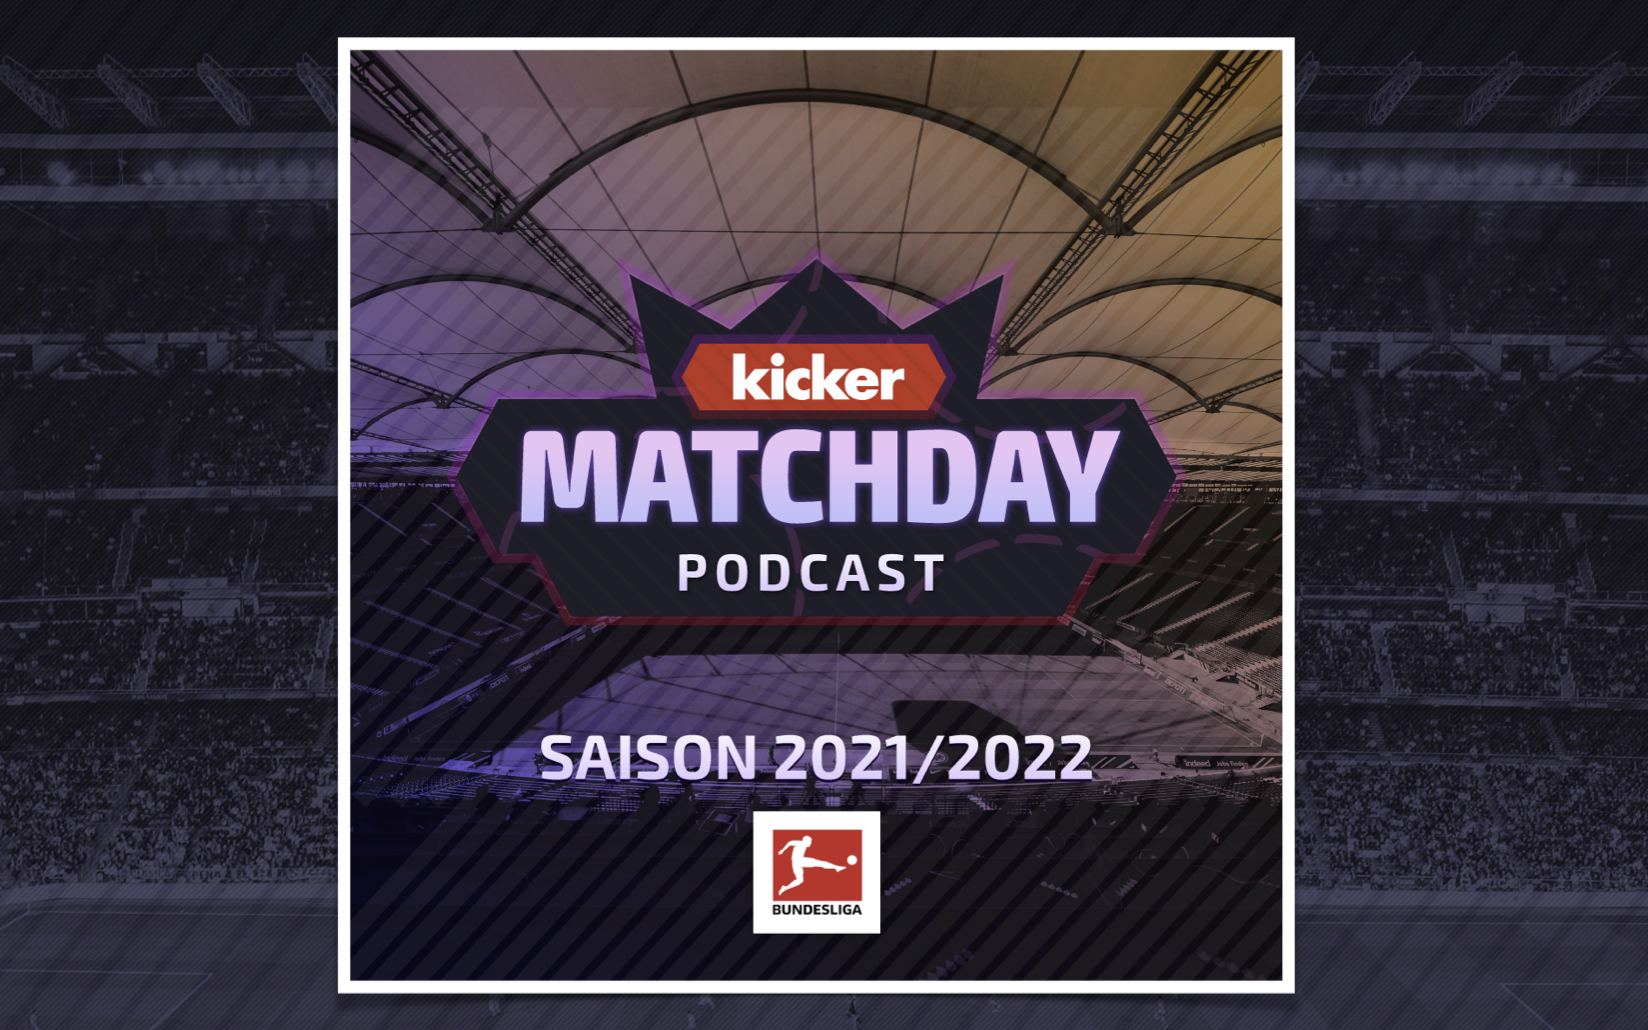 Matchday-Podcast #6 ist live_thumbnail